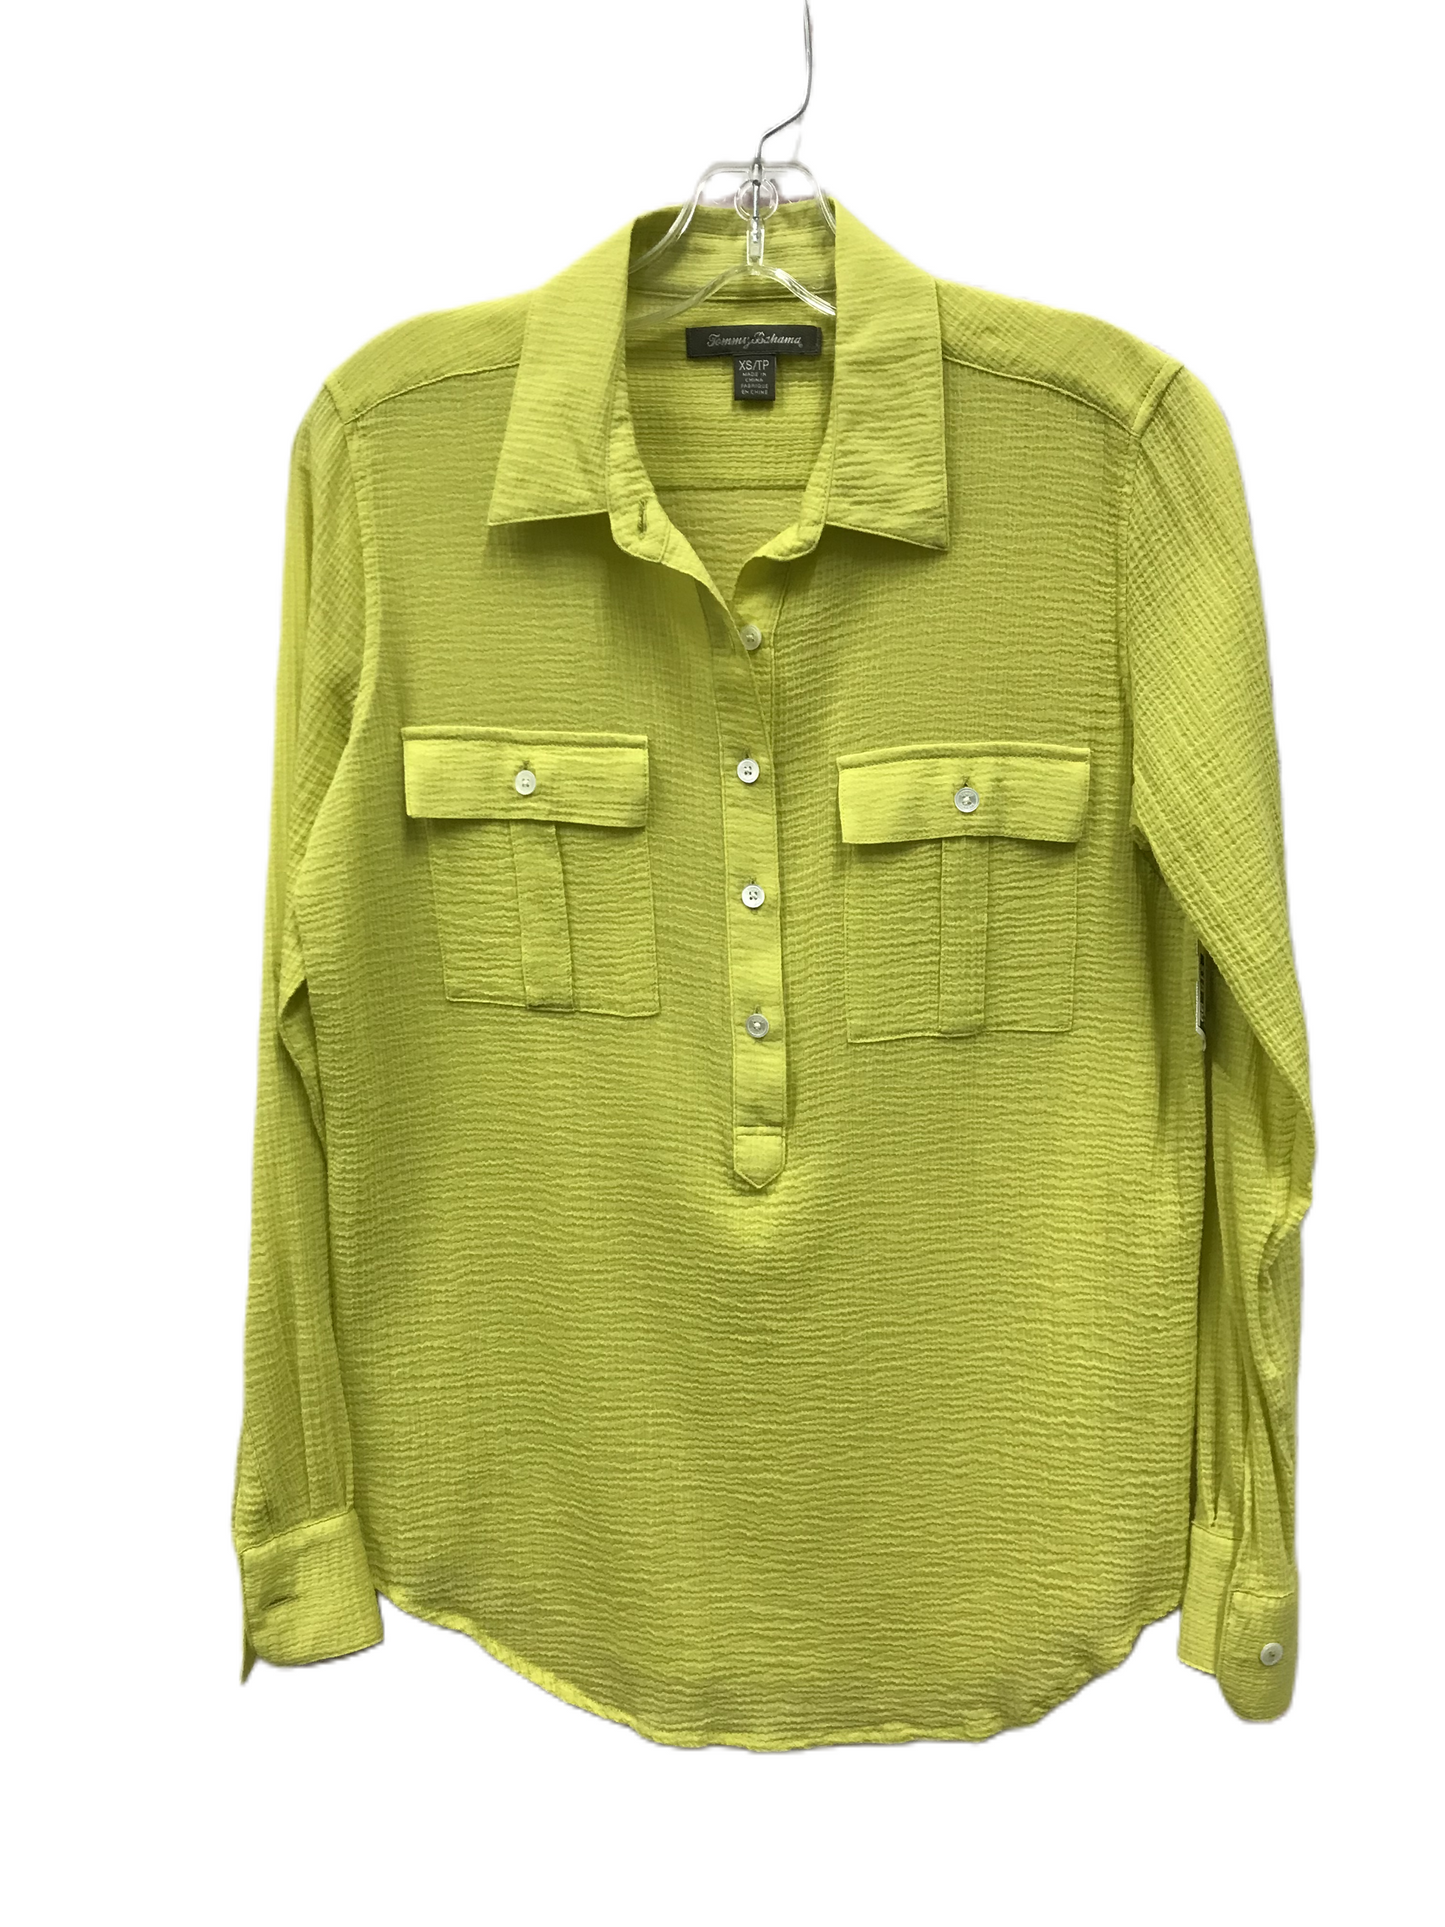 Green Top Long Sleeve By Tommy Bahama, Size: Xs